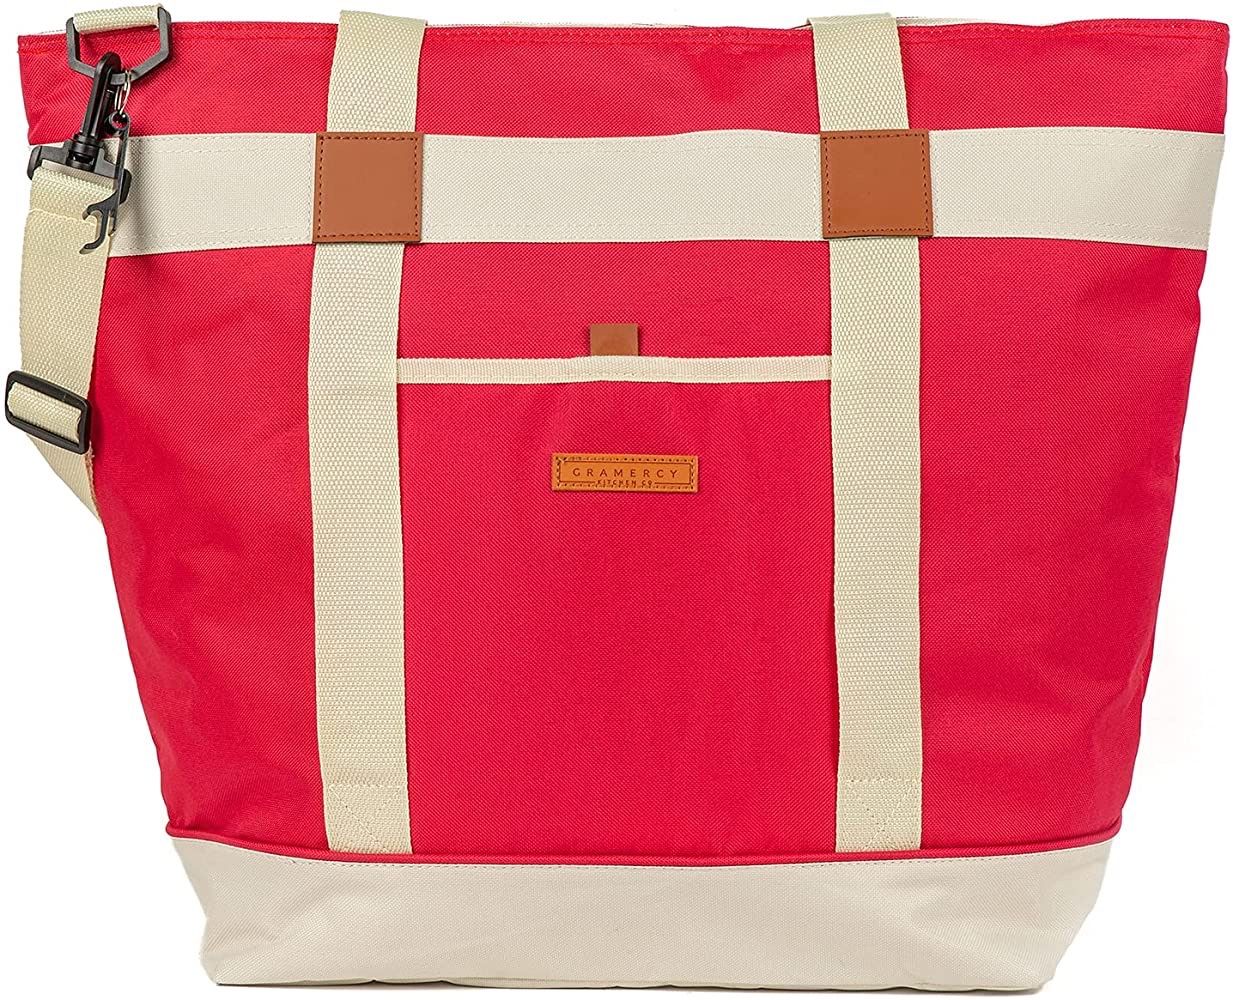  Brand: Gramercy Kitchen Company  14 Insulated Cooler Bag Insulated Grocery Beach Thermal Tote Bag